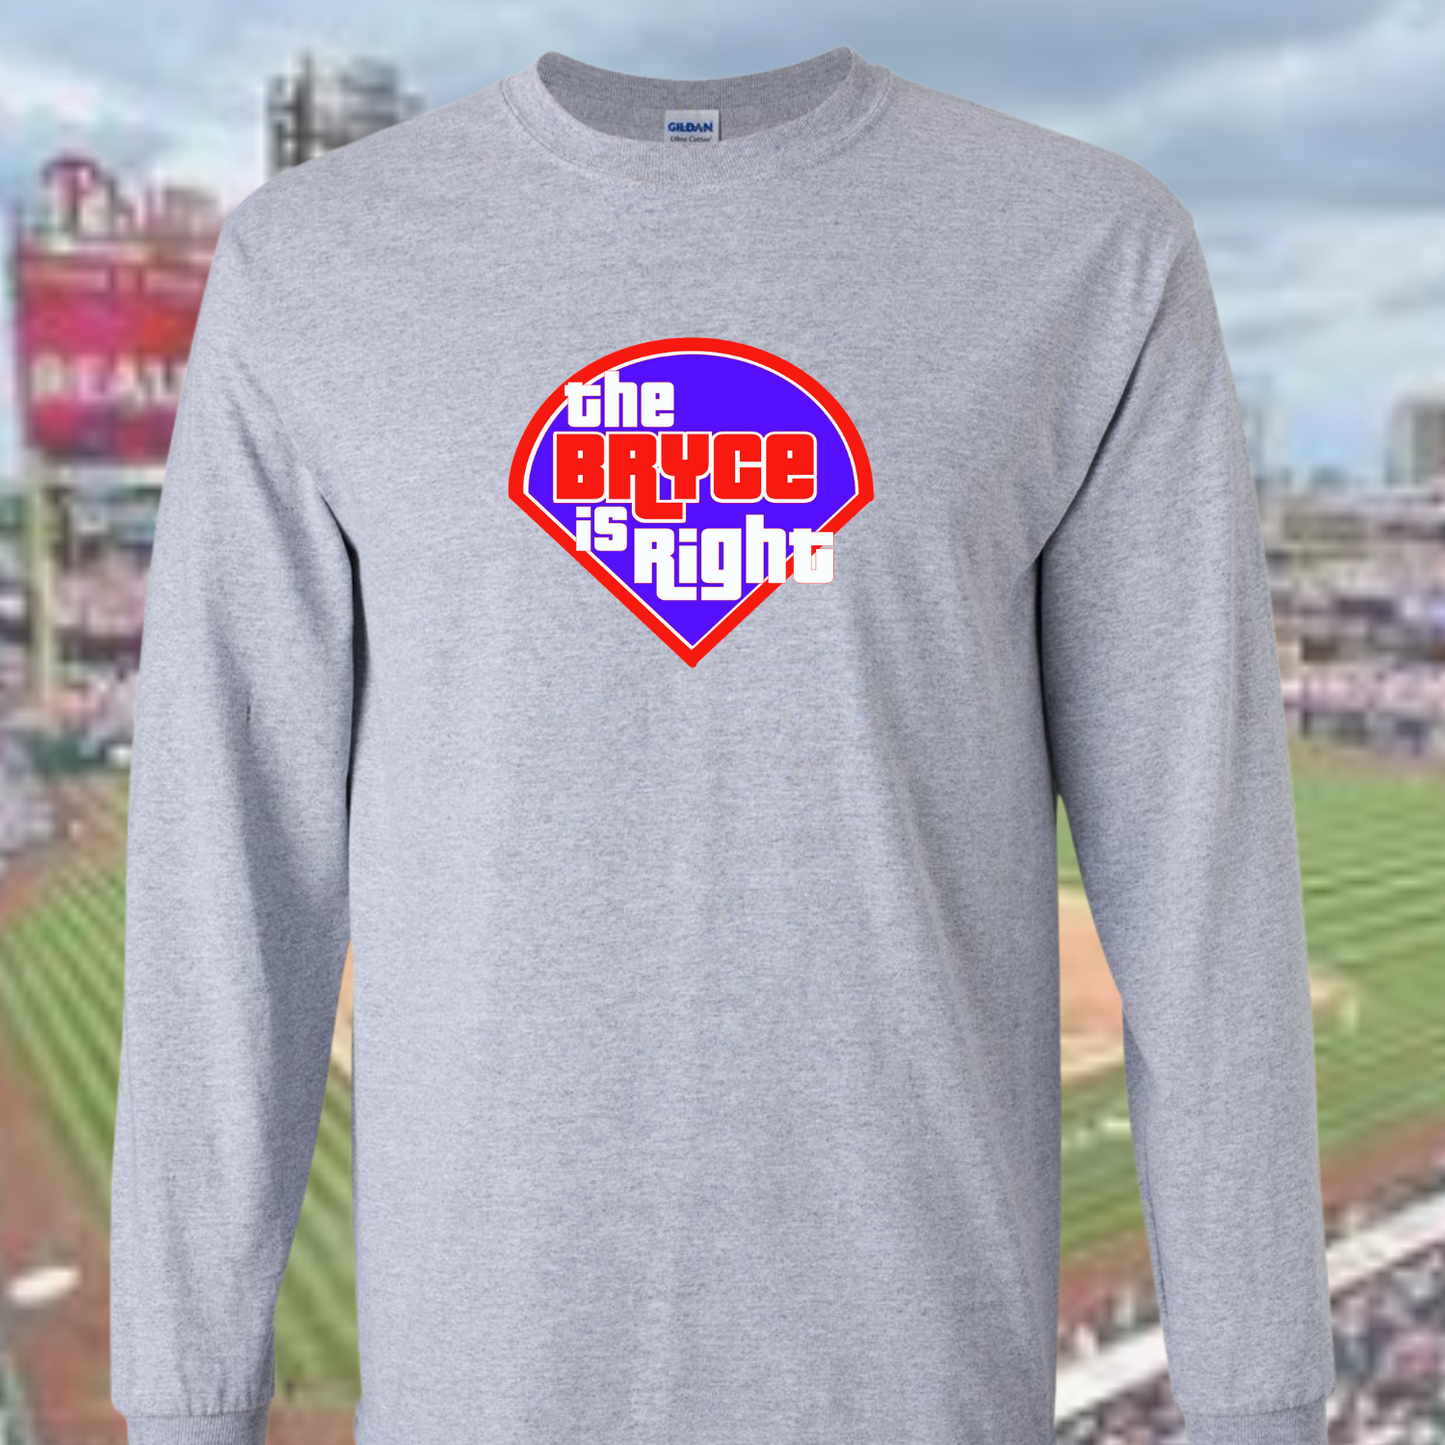 The Bryce is Right! Long Sleeve T-Shirt